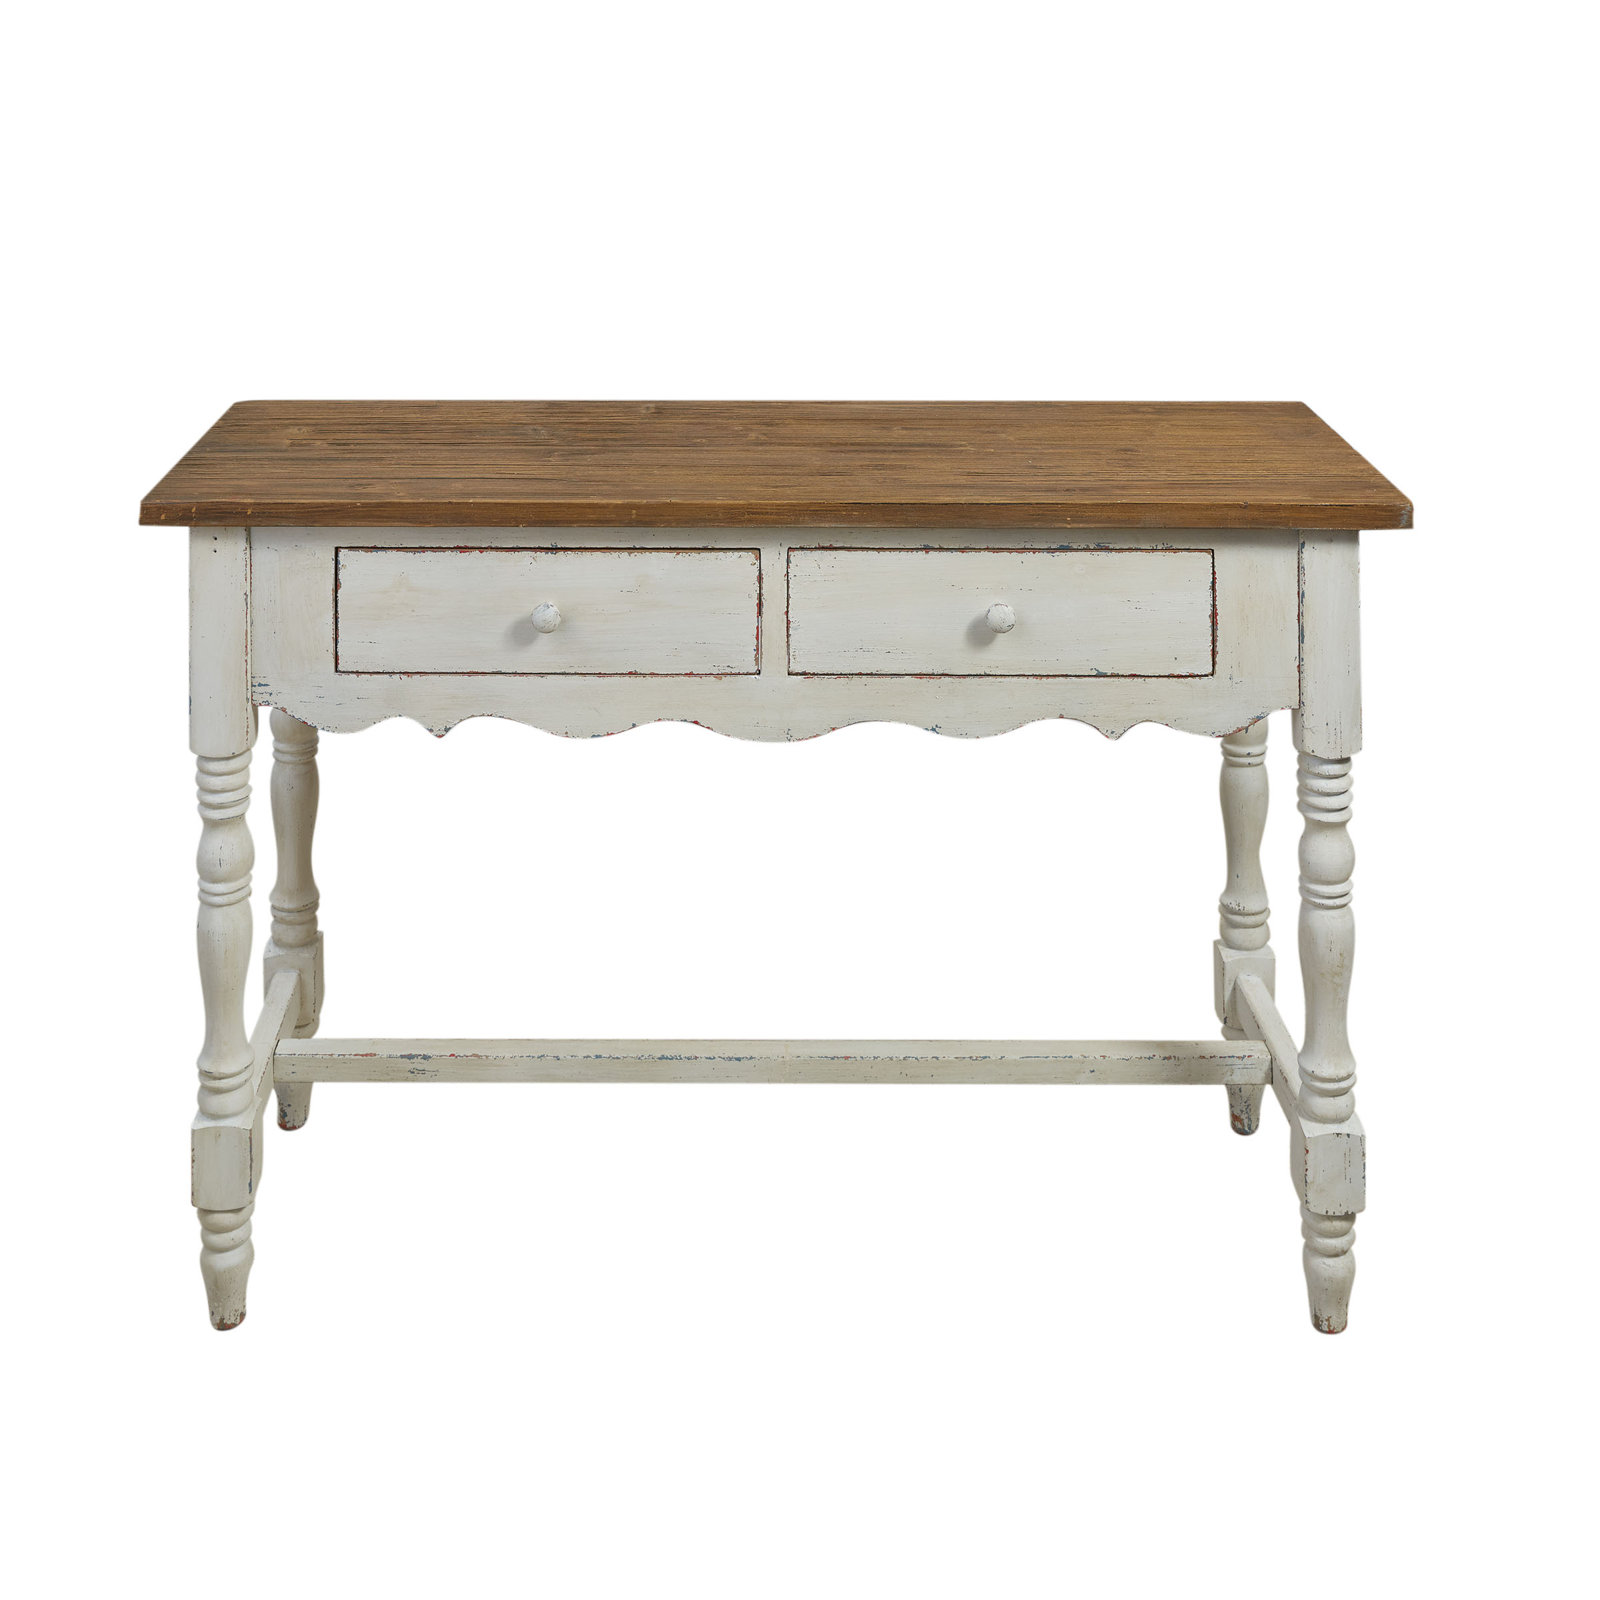 Darby Home Co Emi 31.5'' Console Table